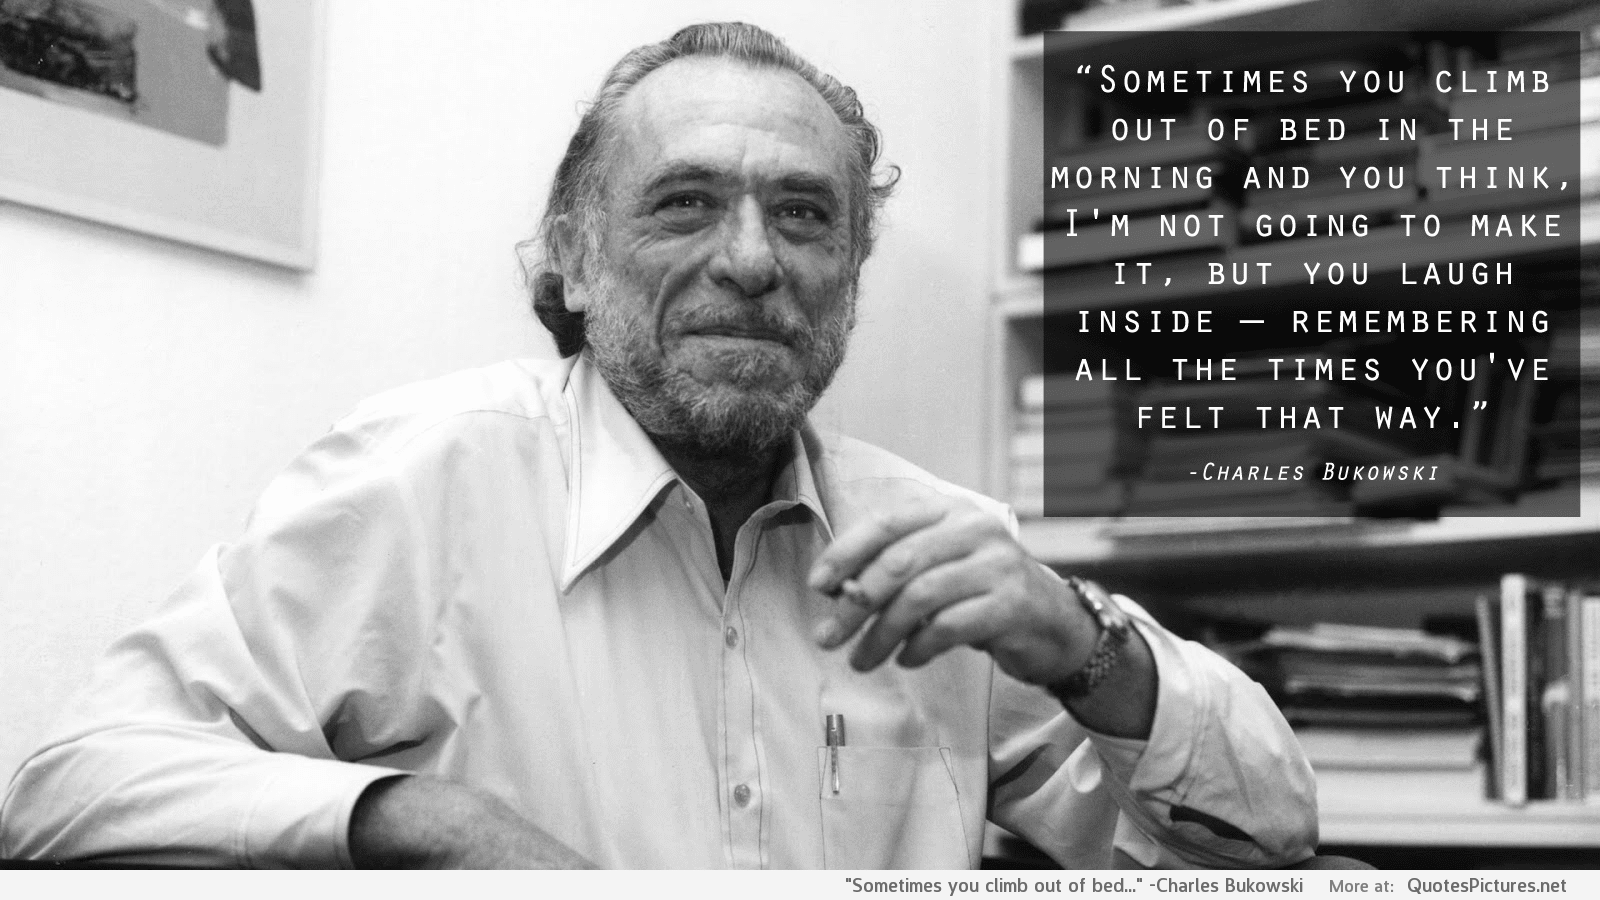 29 thought-provoking photo quotes by Charles Bukowski